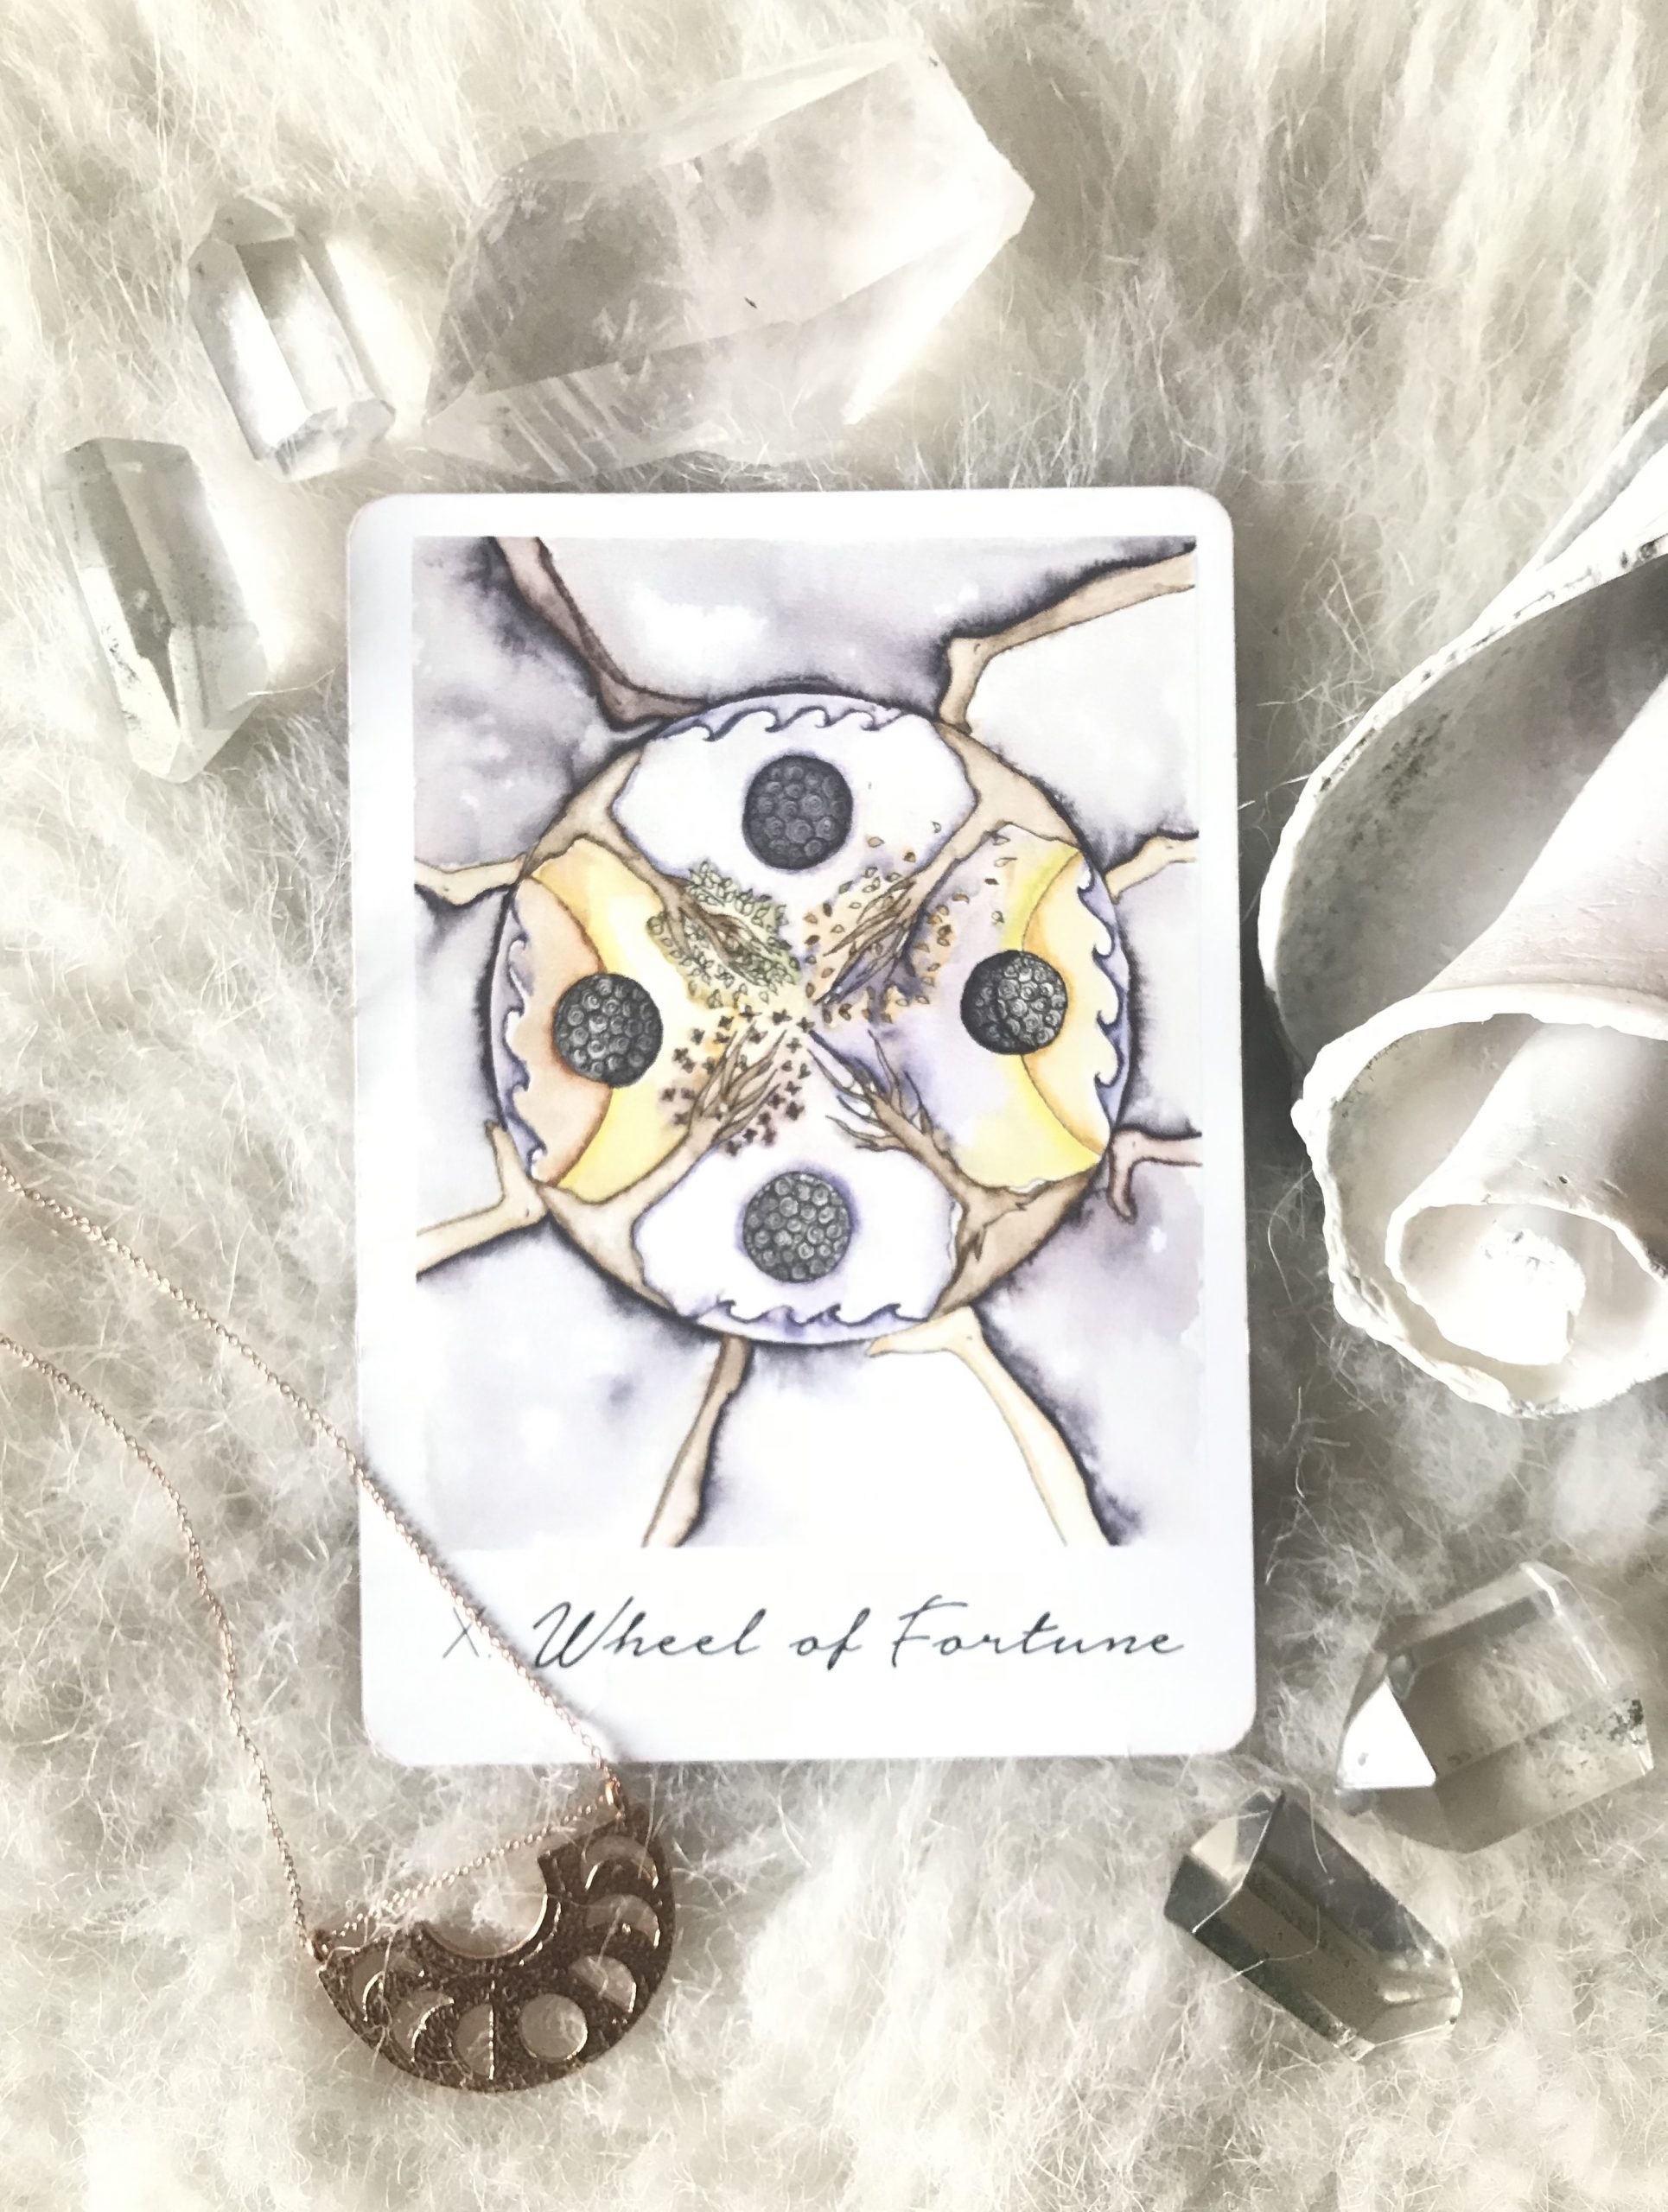 This Tarot Card Reminds Us of Life's Cycles